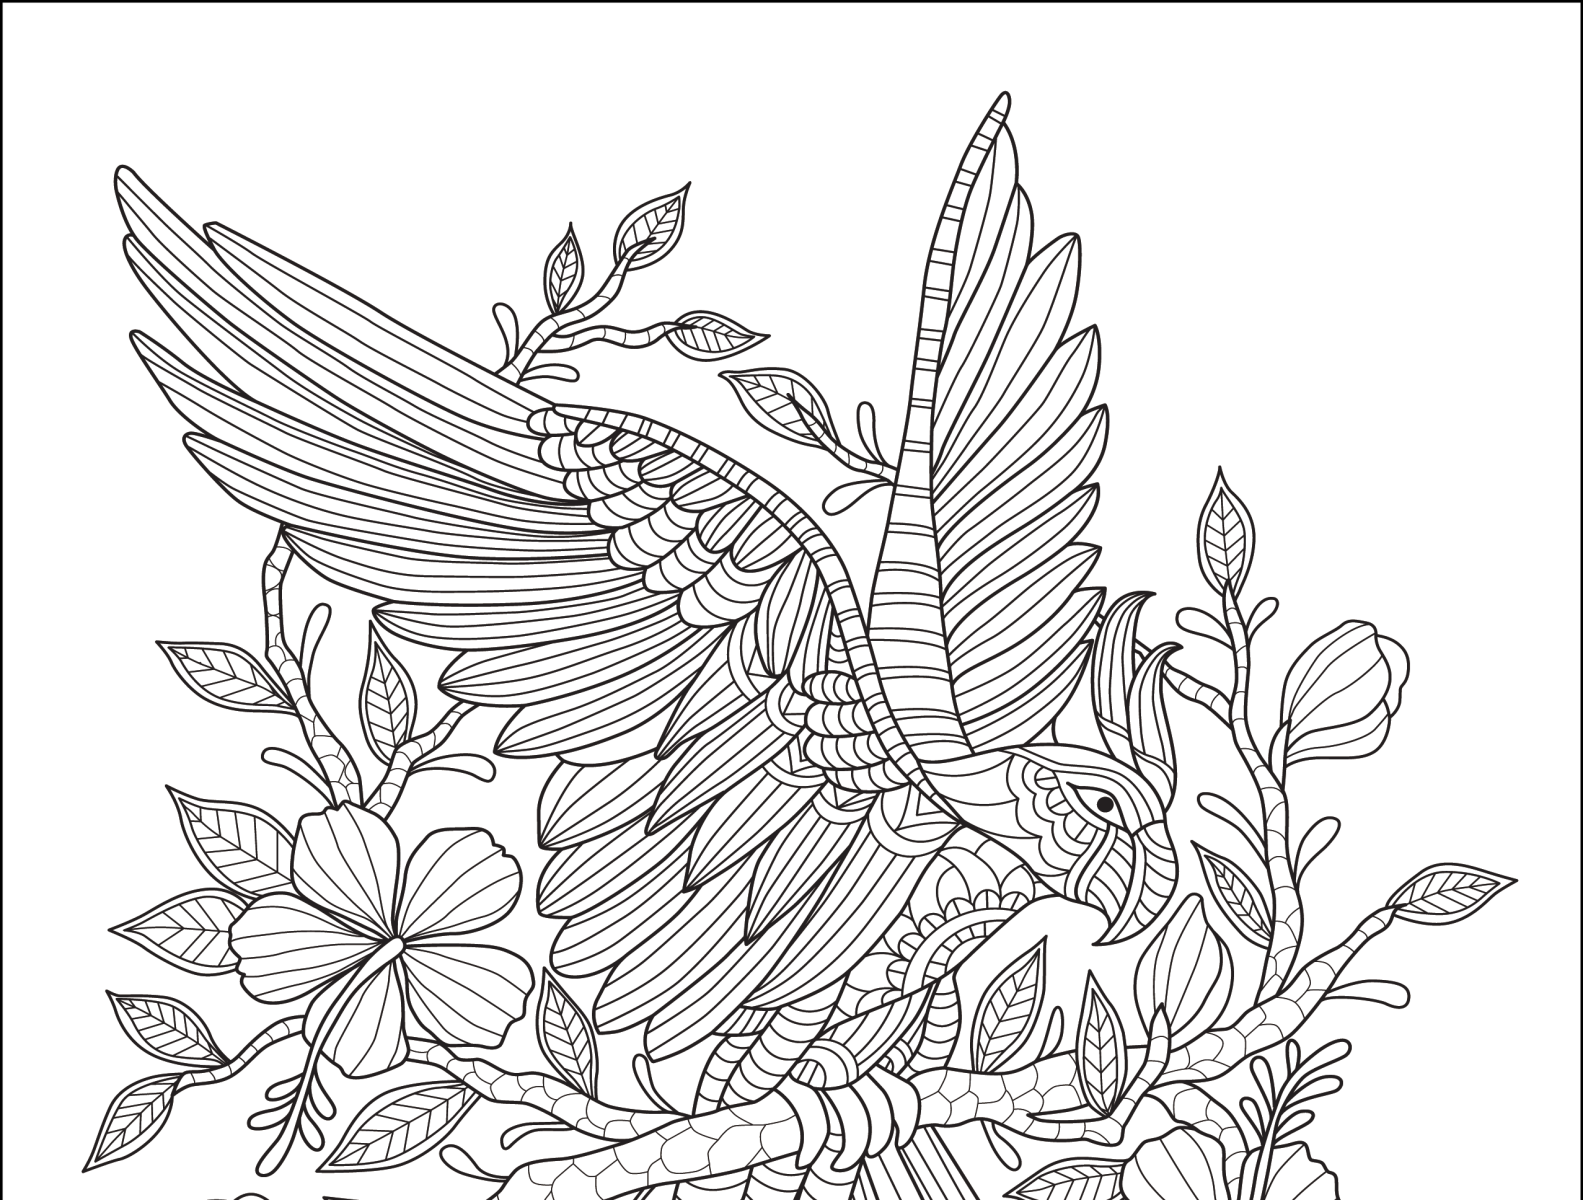 Birds Coloring book pages by dr anarul islam on Dribbble